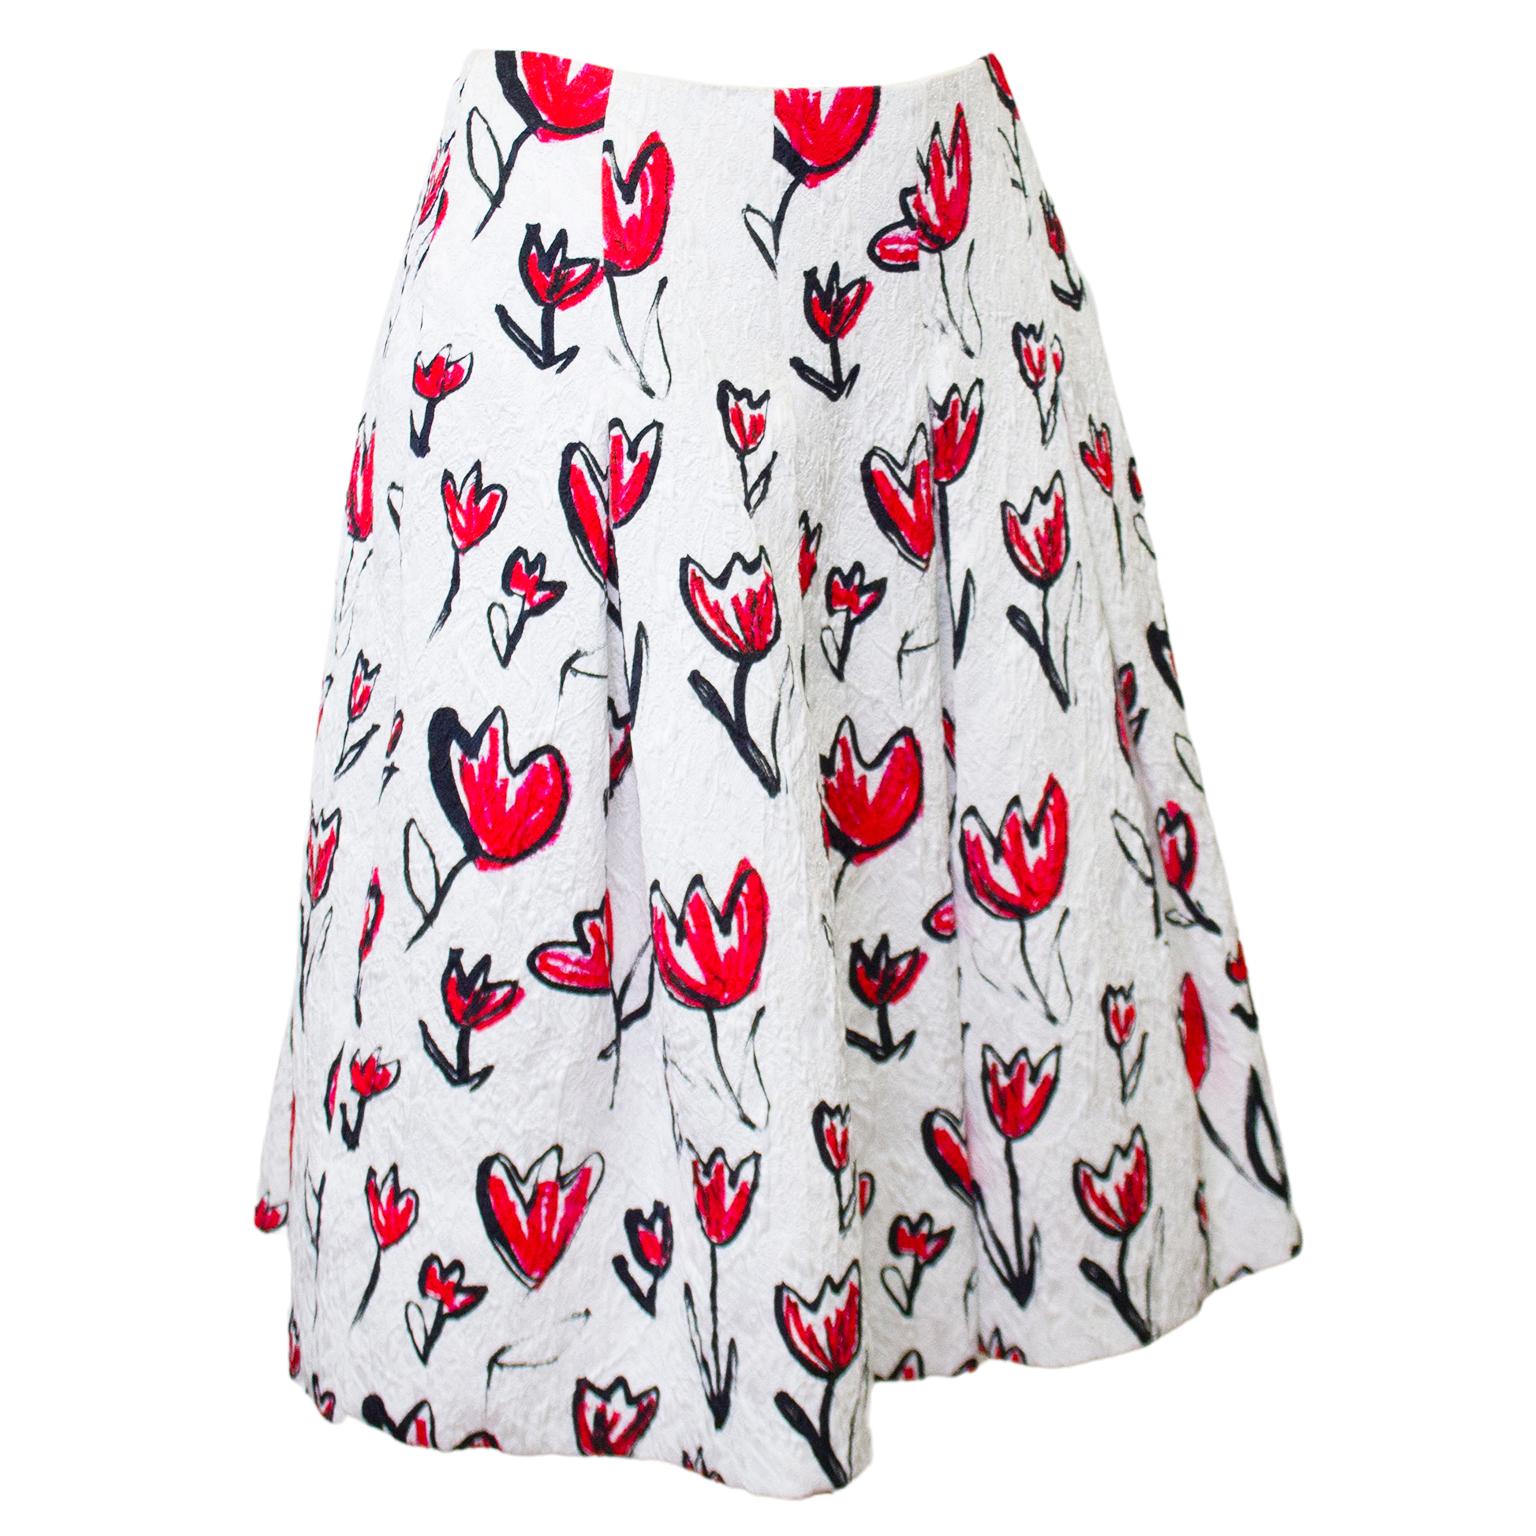 Early 2000s Oscar de la Renta flared skirt with all over 'drawn' tulip print. The skirt has side pockets and zips up the side. The textured cotton/viscose fabric has some weight to it but is also light due to the fitted pleated style of the skirt.